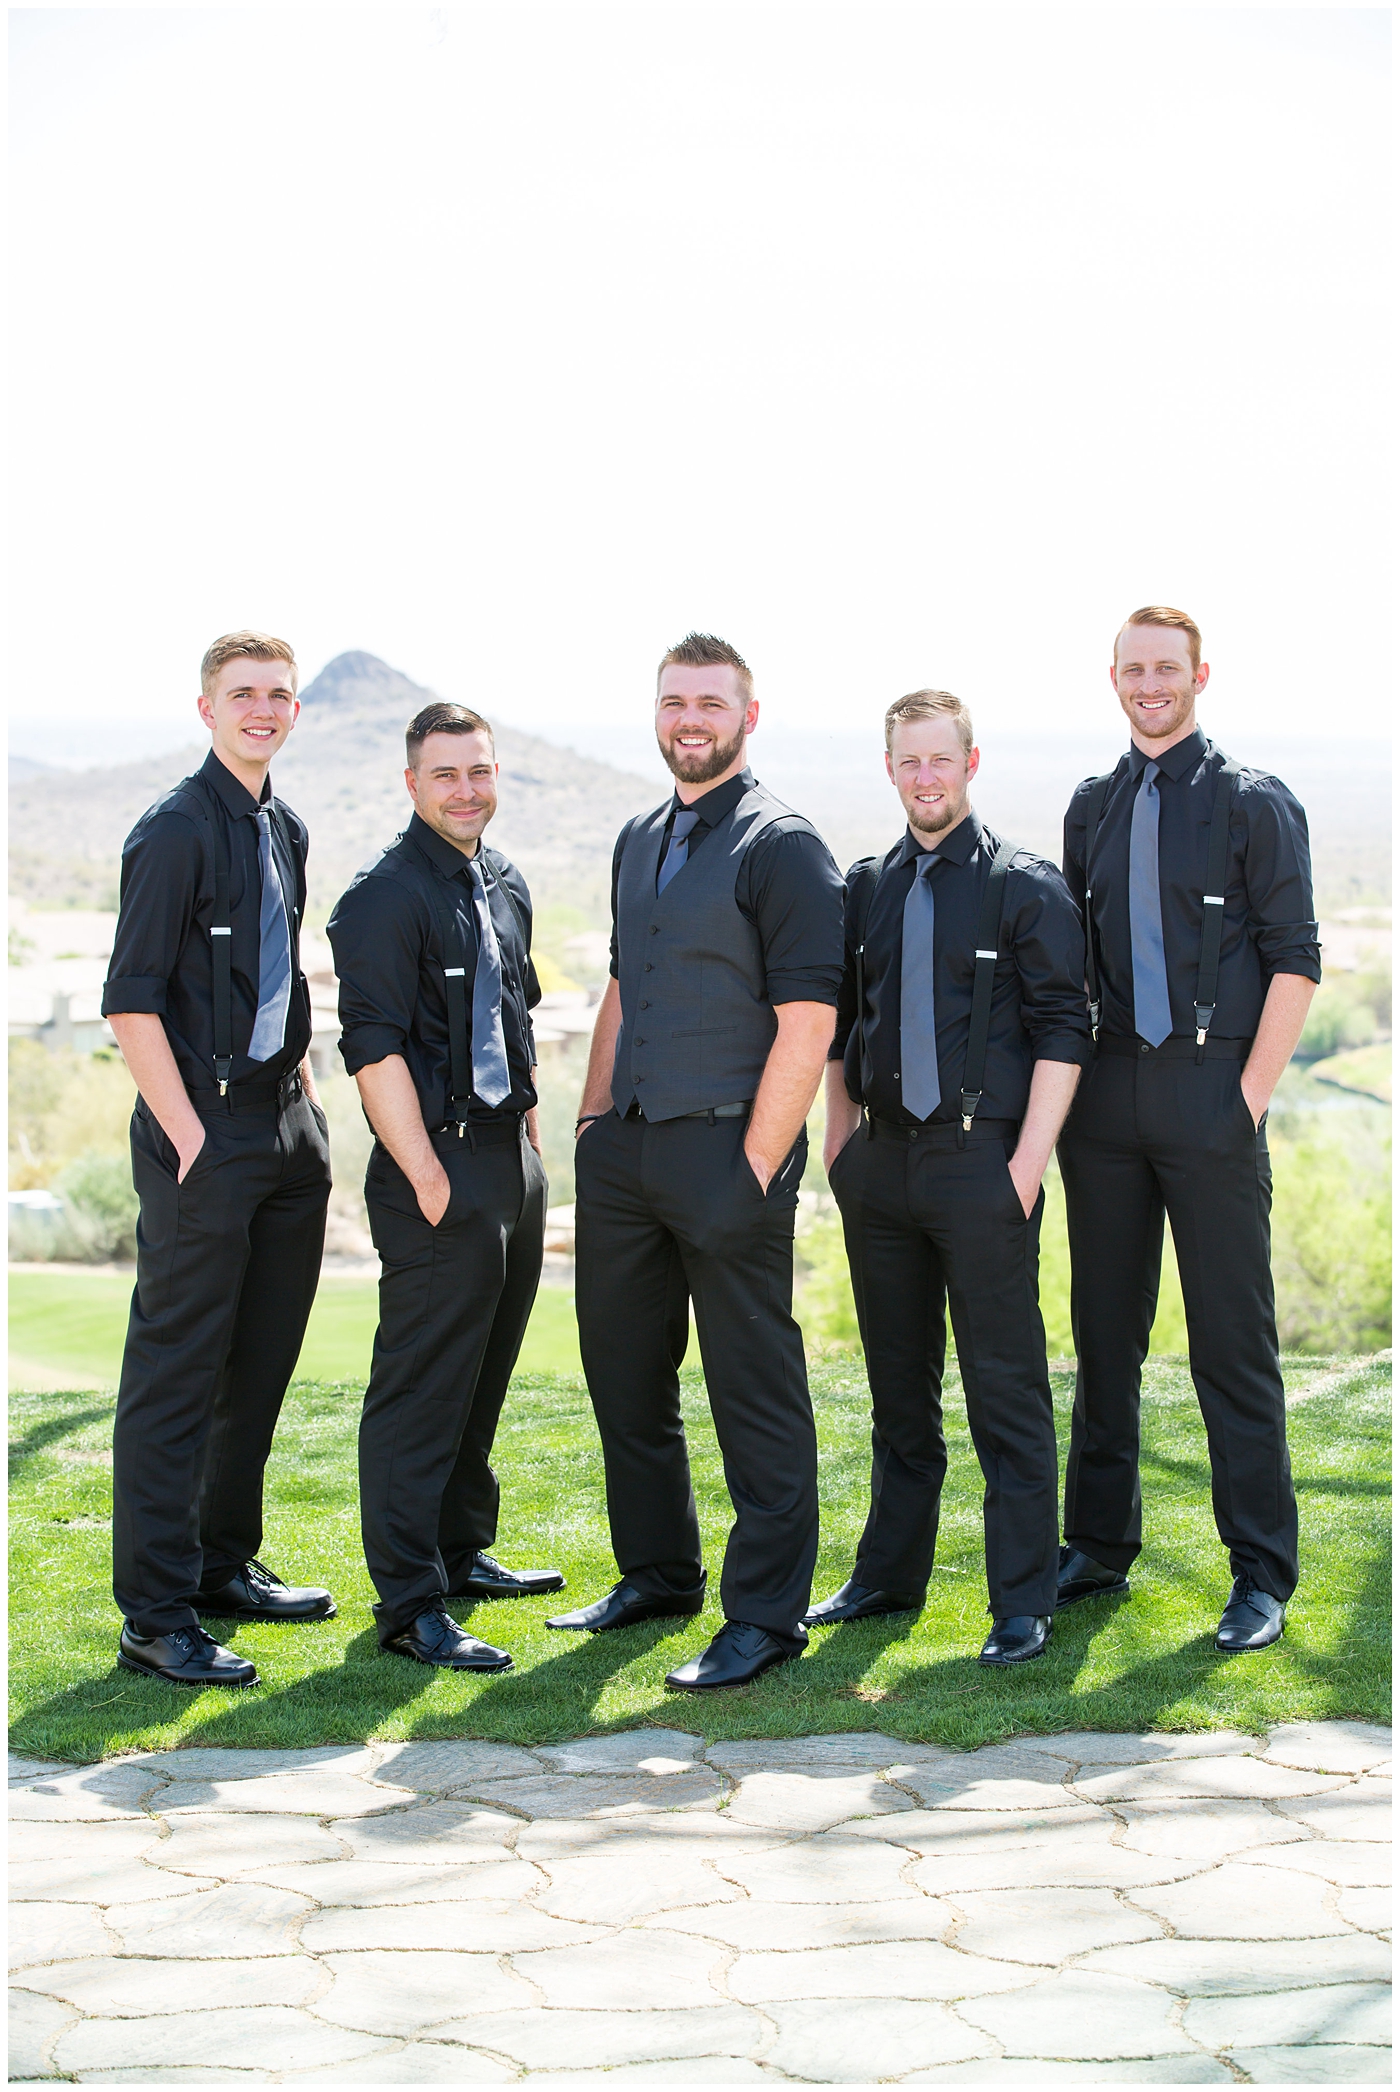 groom in black pants and vest and tie with rolled up shirt sleeves with succulent boutonniere with groomsmen in black pants with suspenders and tie wedding day bridal party portrait